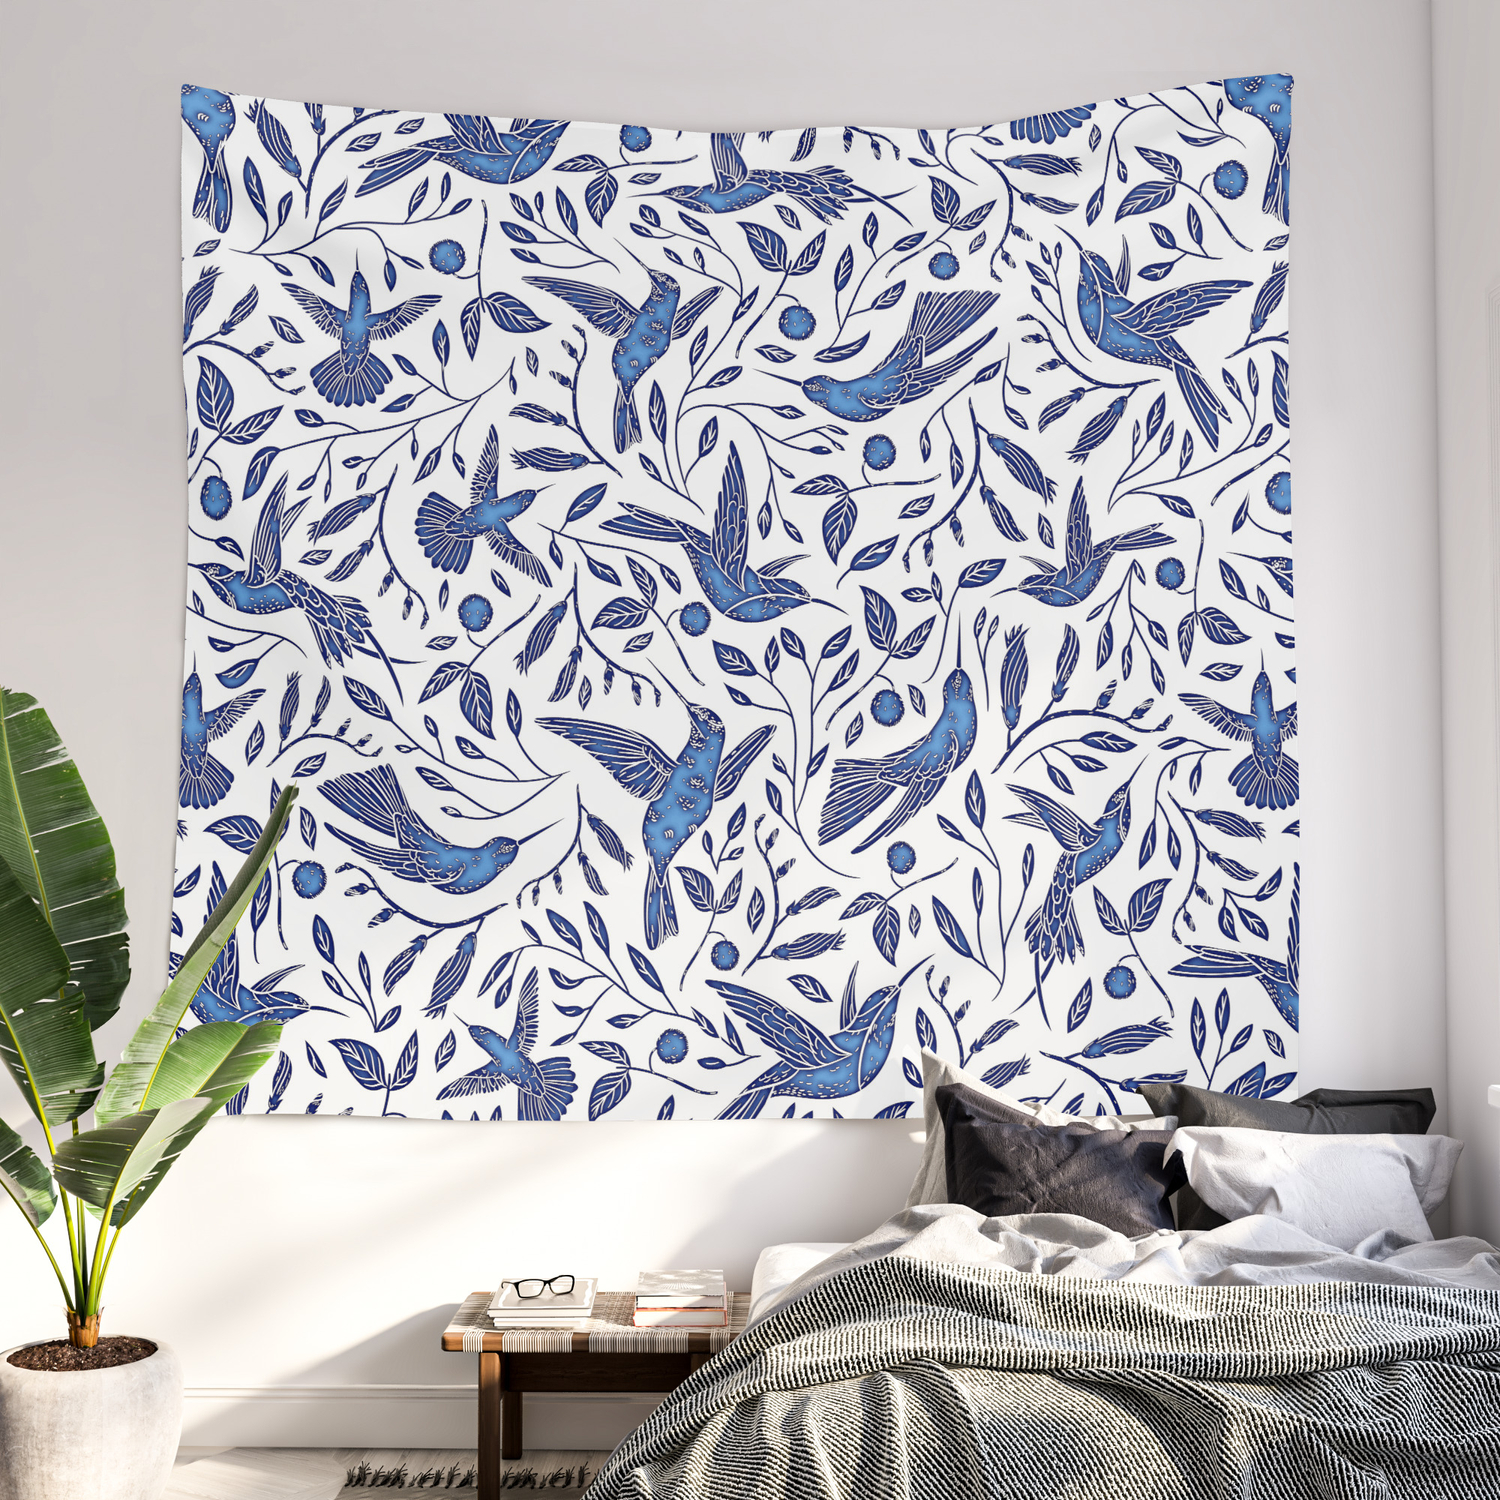 Kess InHouse bruxamagica Bird with Fall Leaves Blue White Animals Pattern Illustration Mixed Media Wall Tapestry 